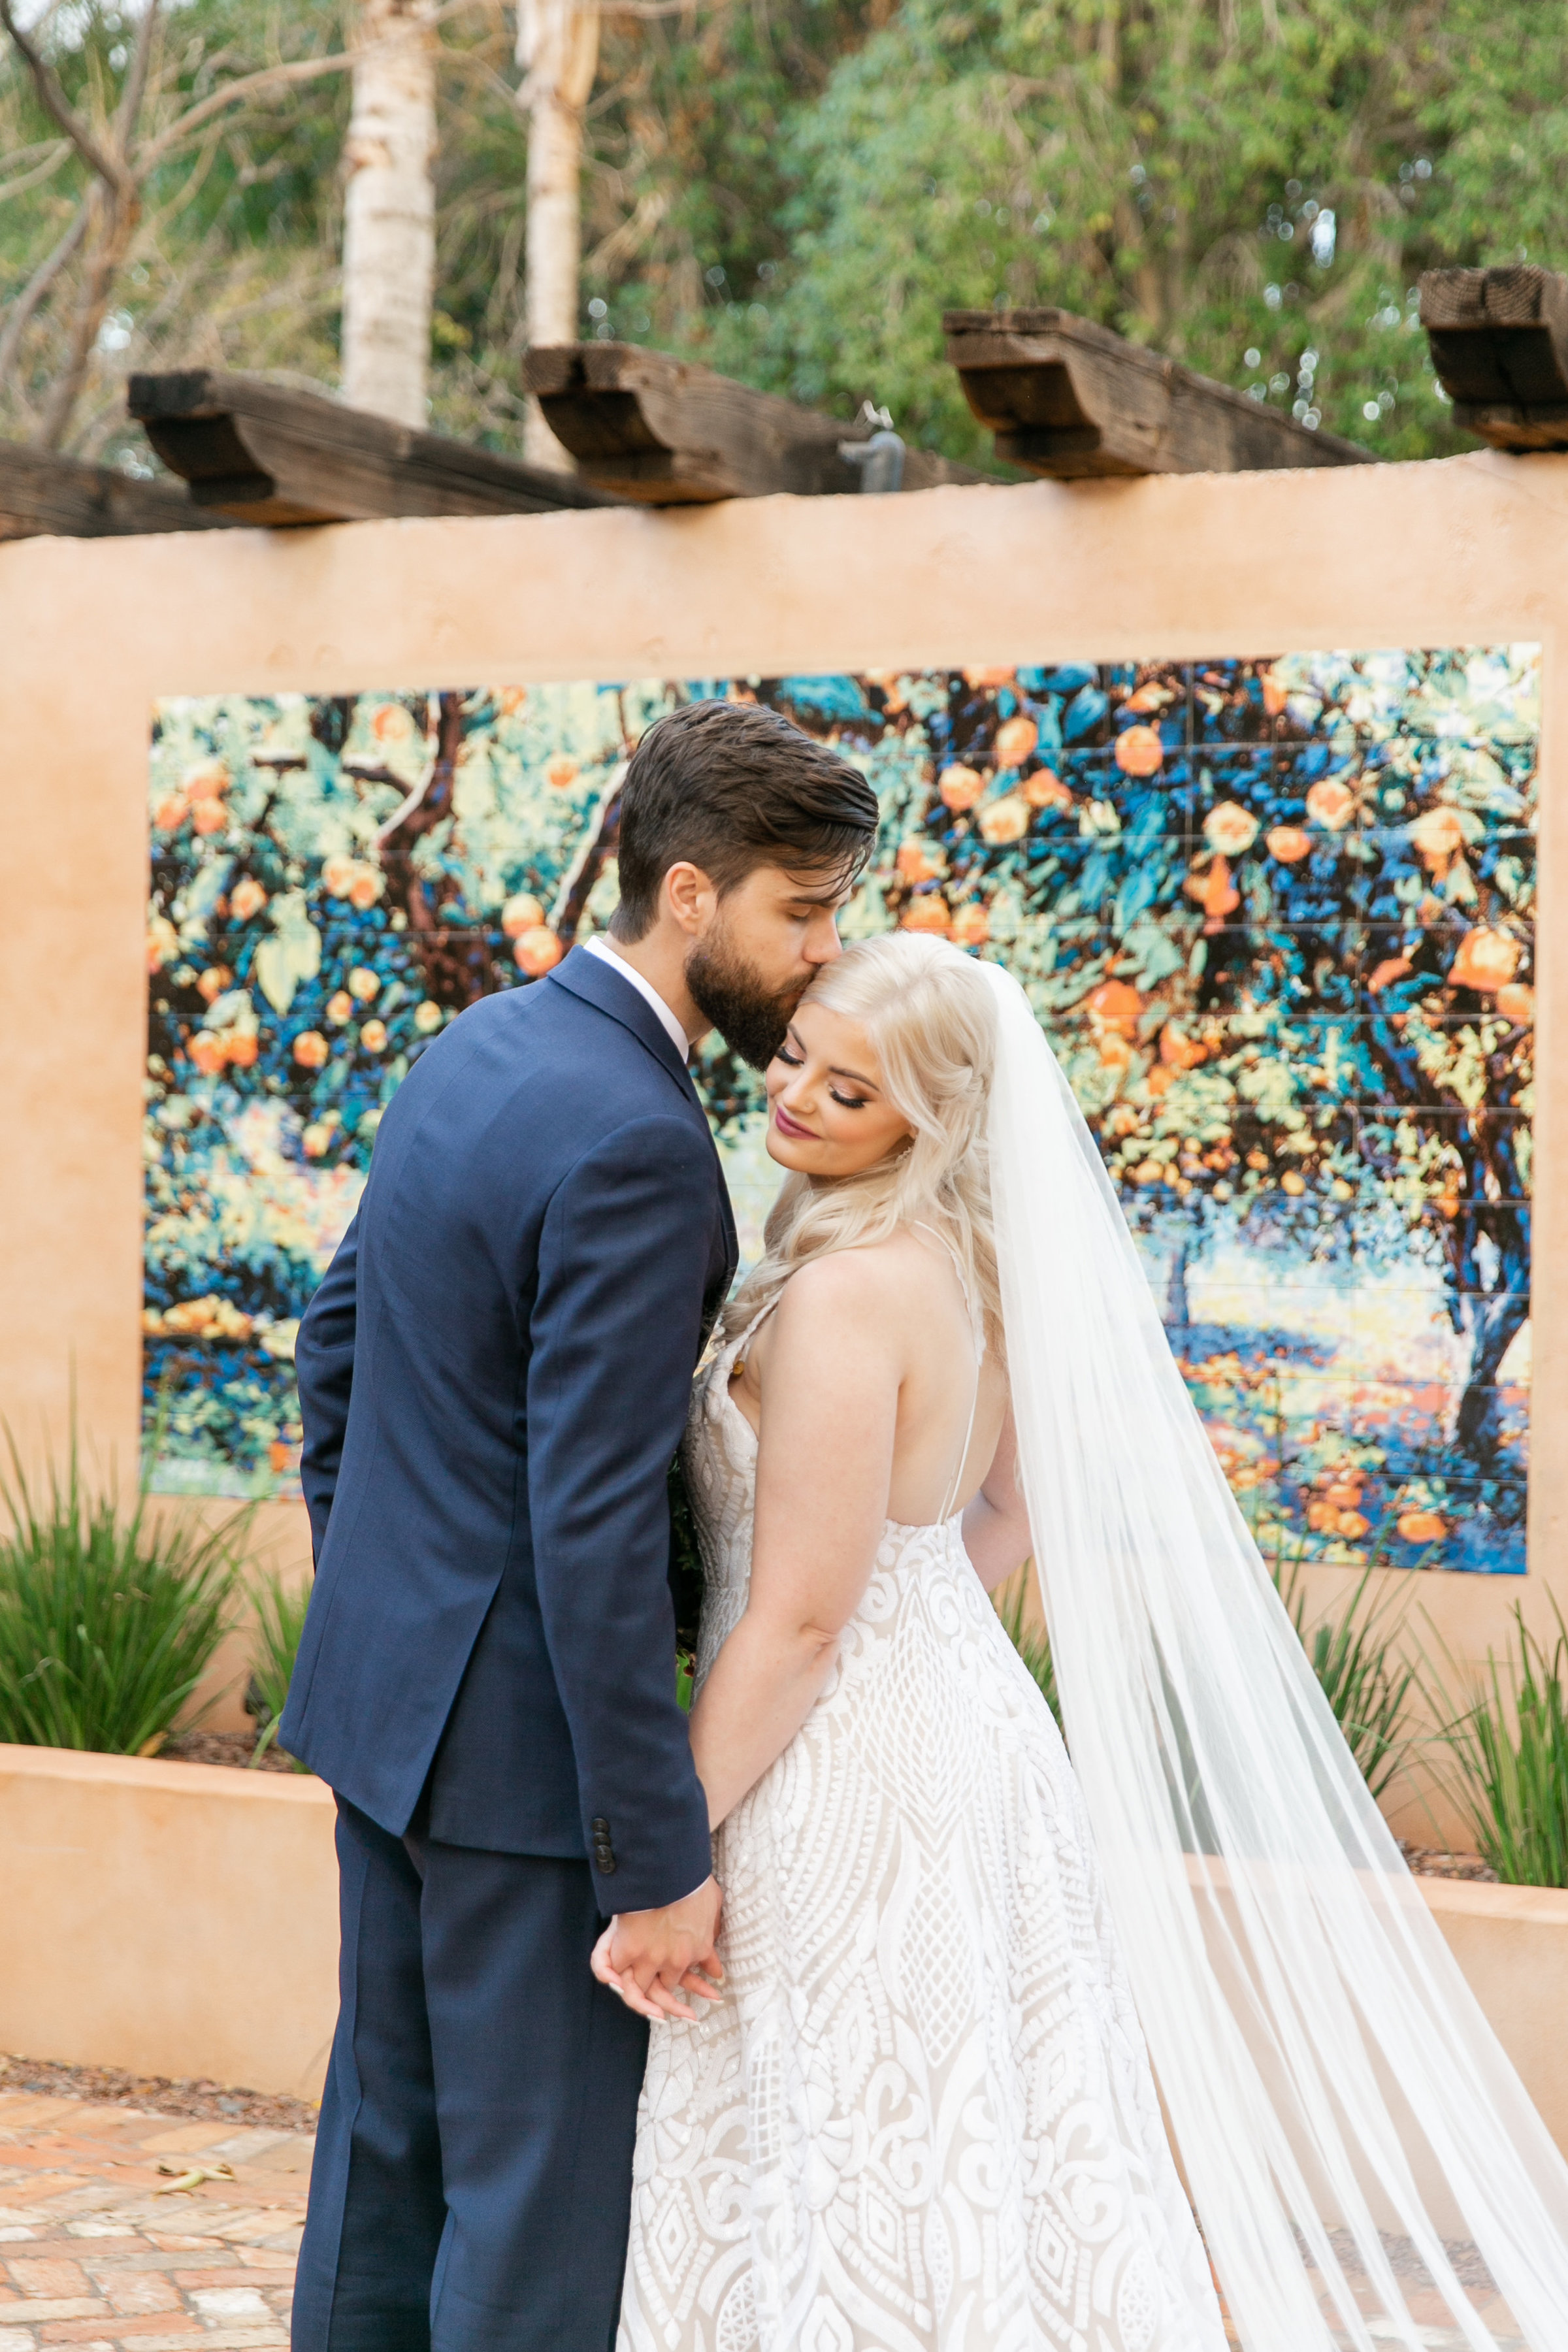 Karlie Colleen Photography - The Royal Palms Wedding - Some Like It Classic - Alex & Sam-528